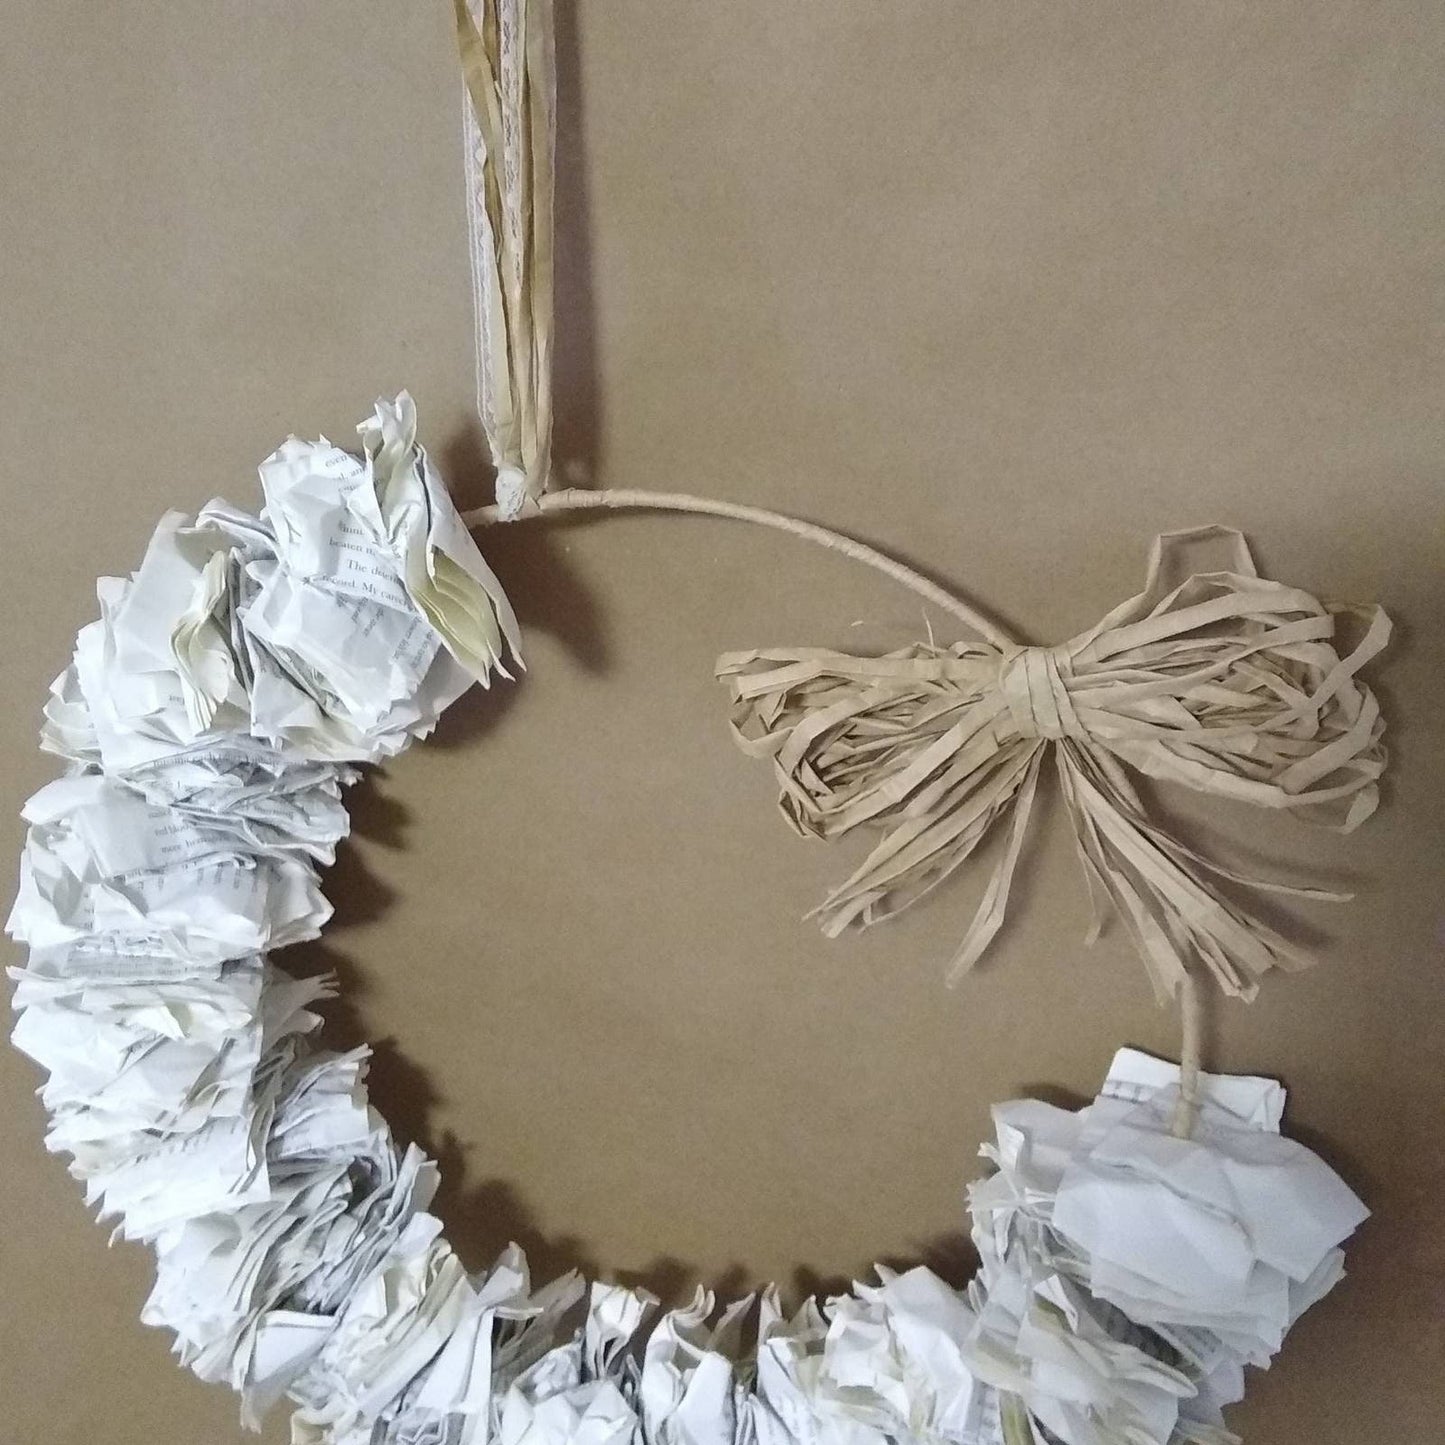 Book Page Wreath with Craft Paper Raffia and Cream Lace